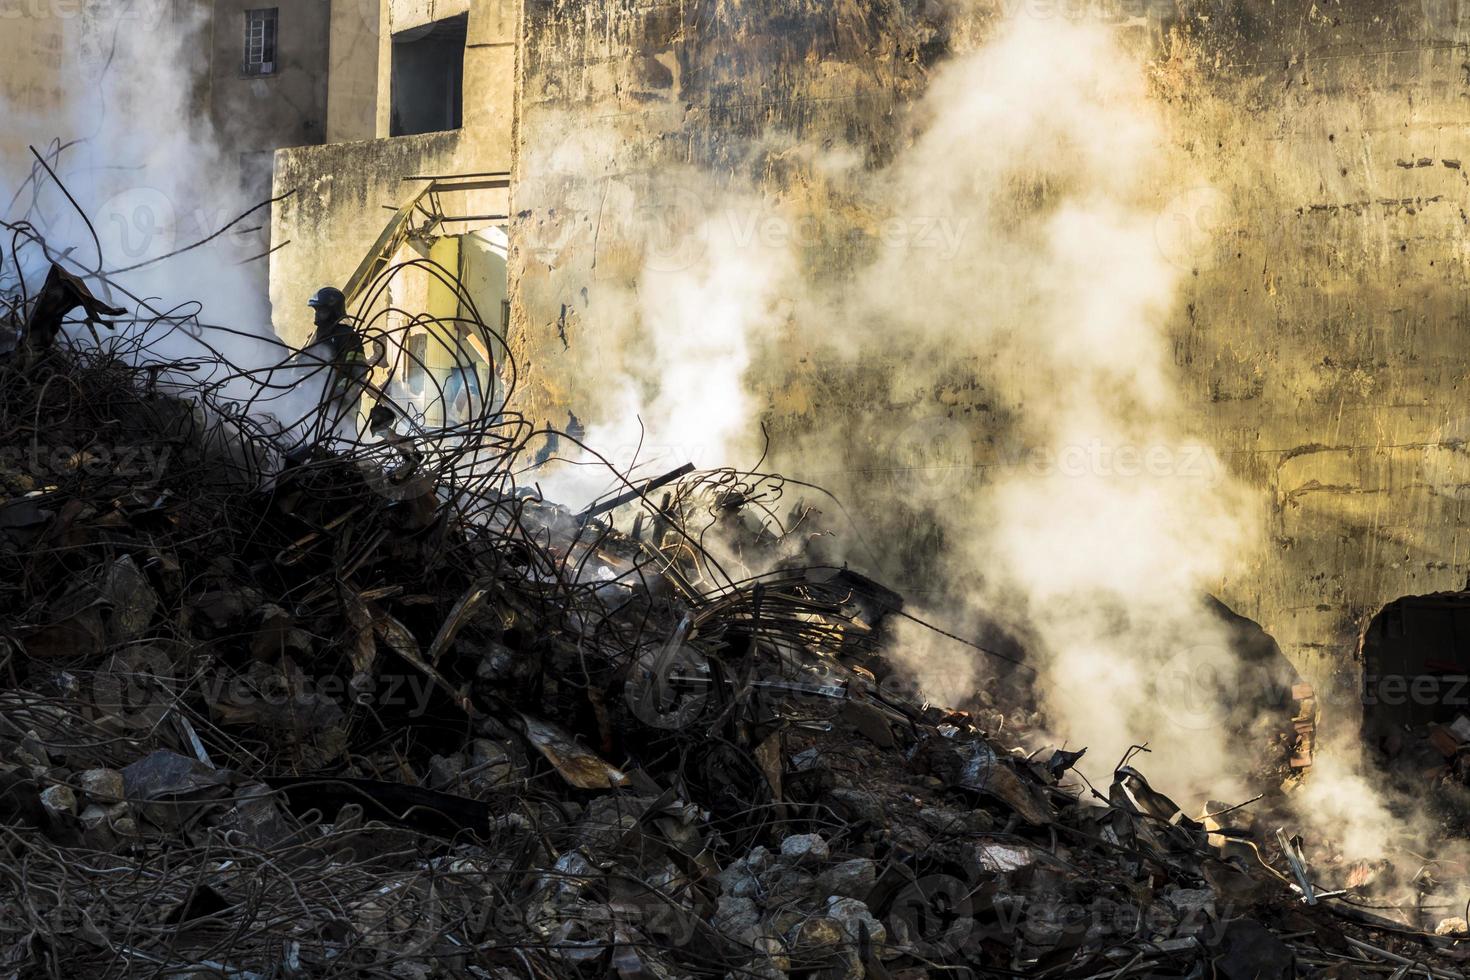 Brazilian firefighter fights flames in the rubble where a 24-story building collapsed after a fire photo